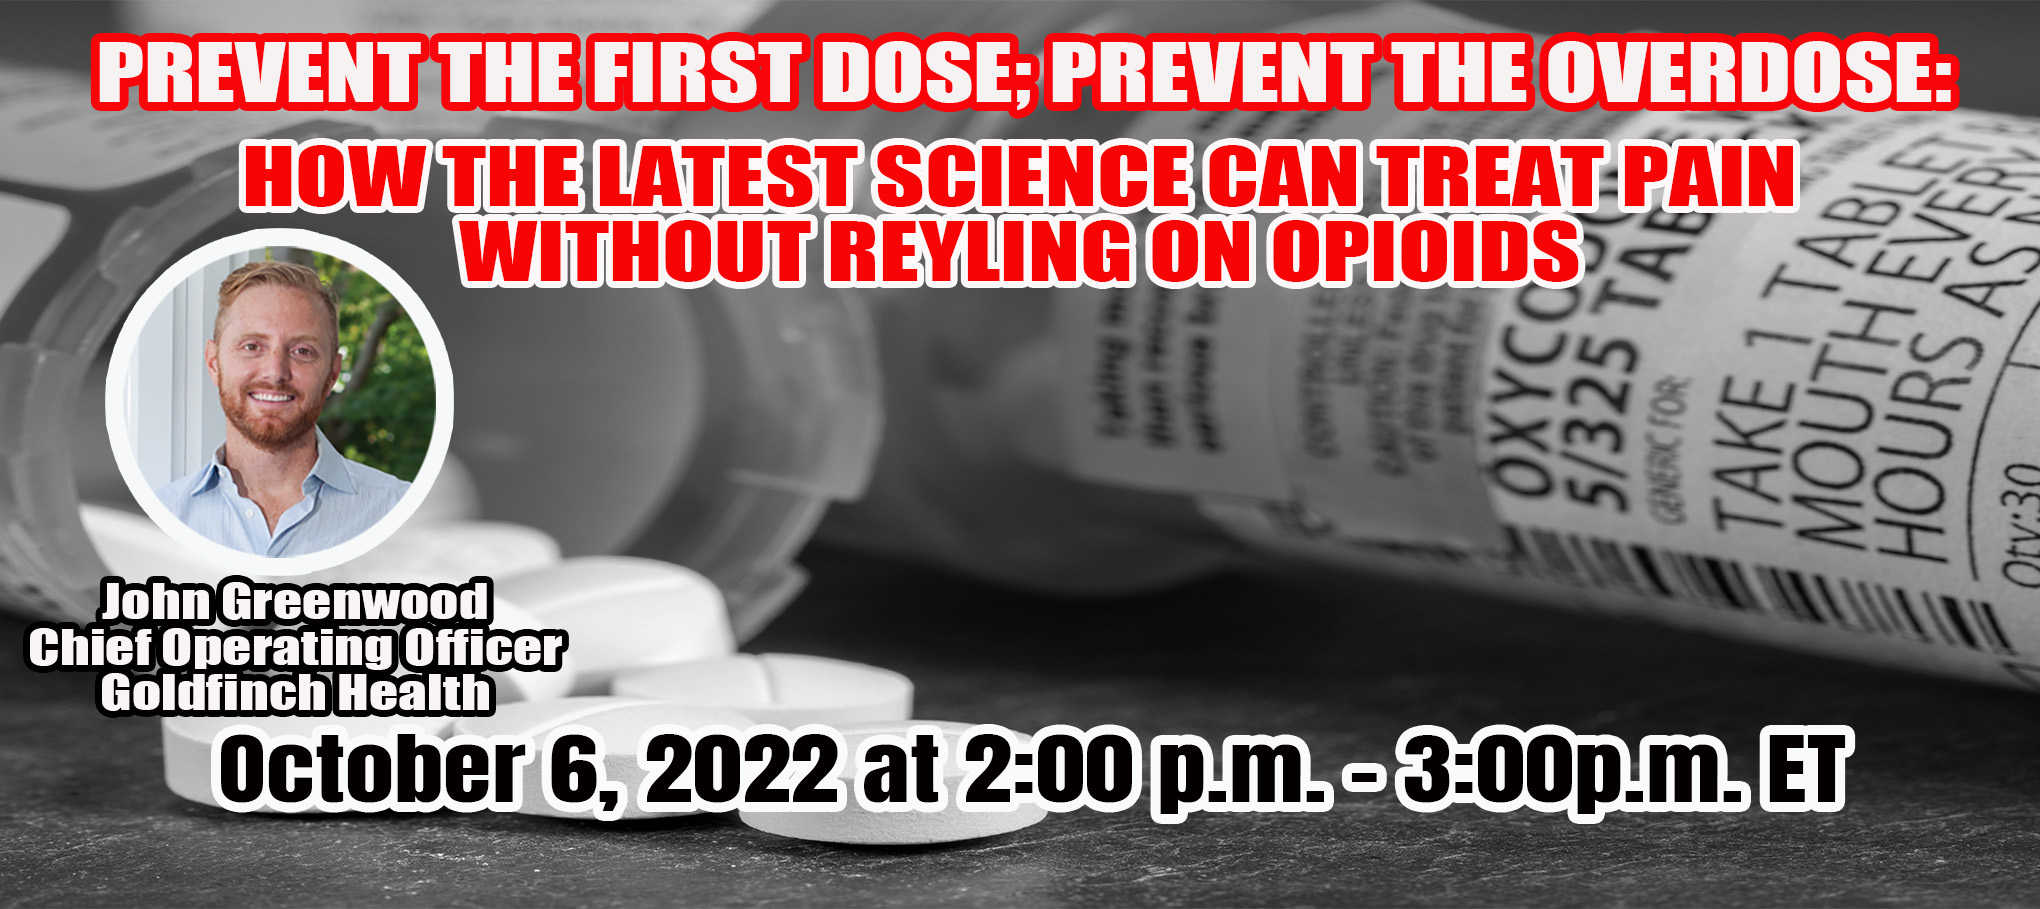 Prevent the First Dose and Overdose Carousel